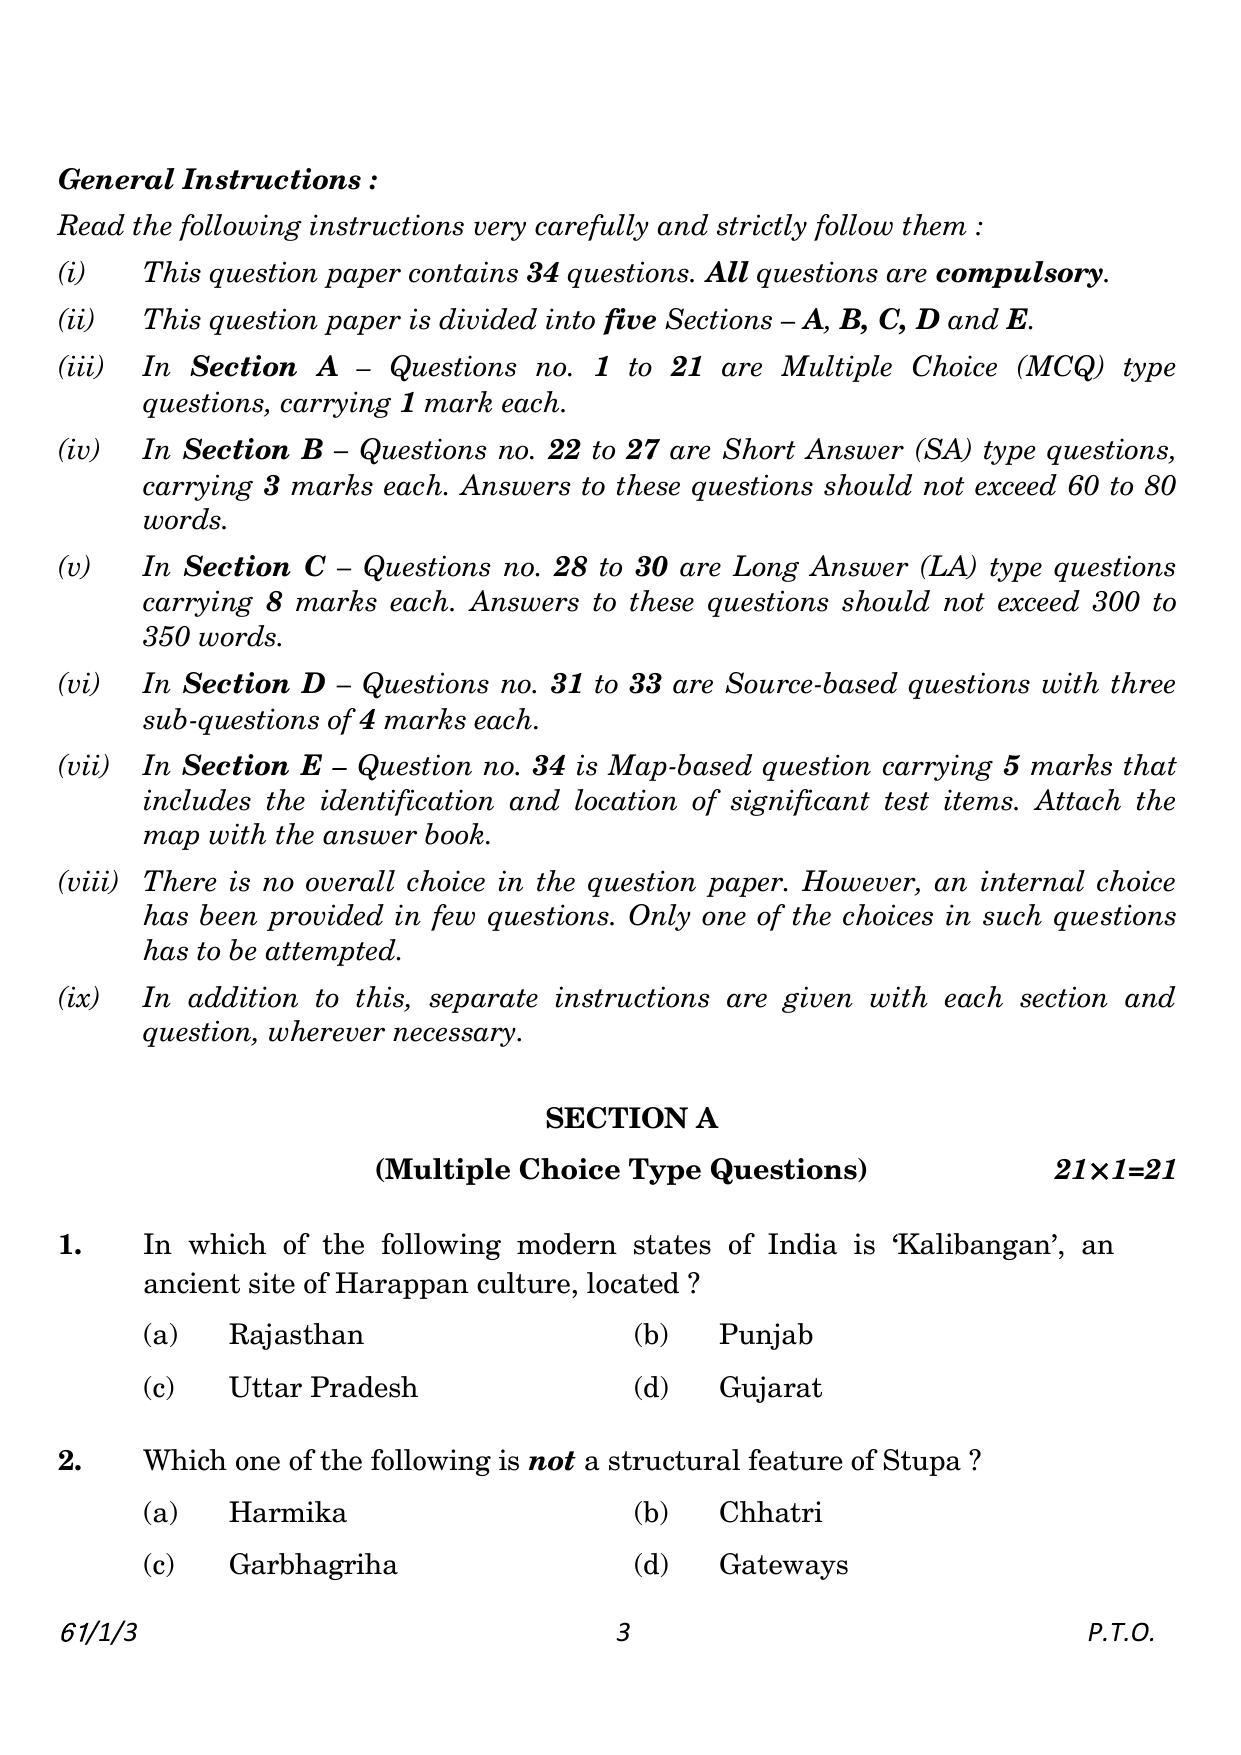 CBSE Class 12 61-1-3 History 2023 Question Paper - Page 3